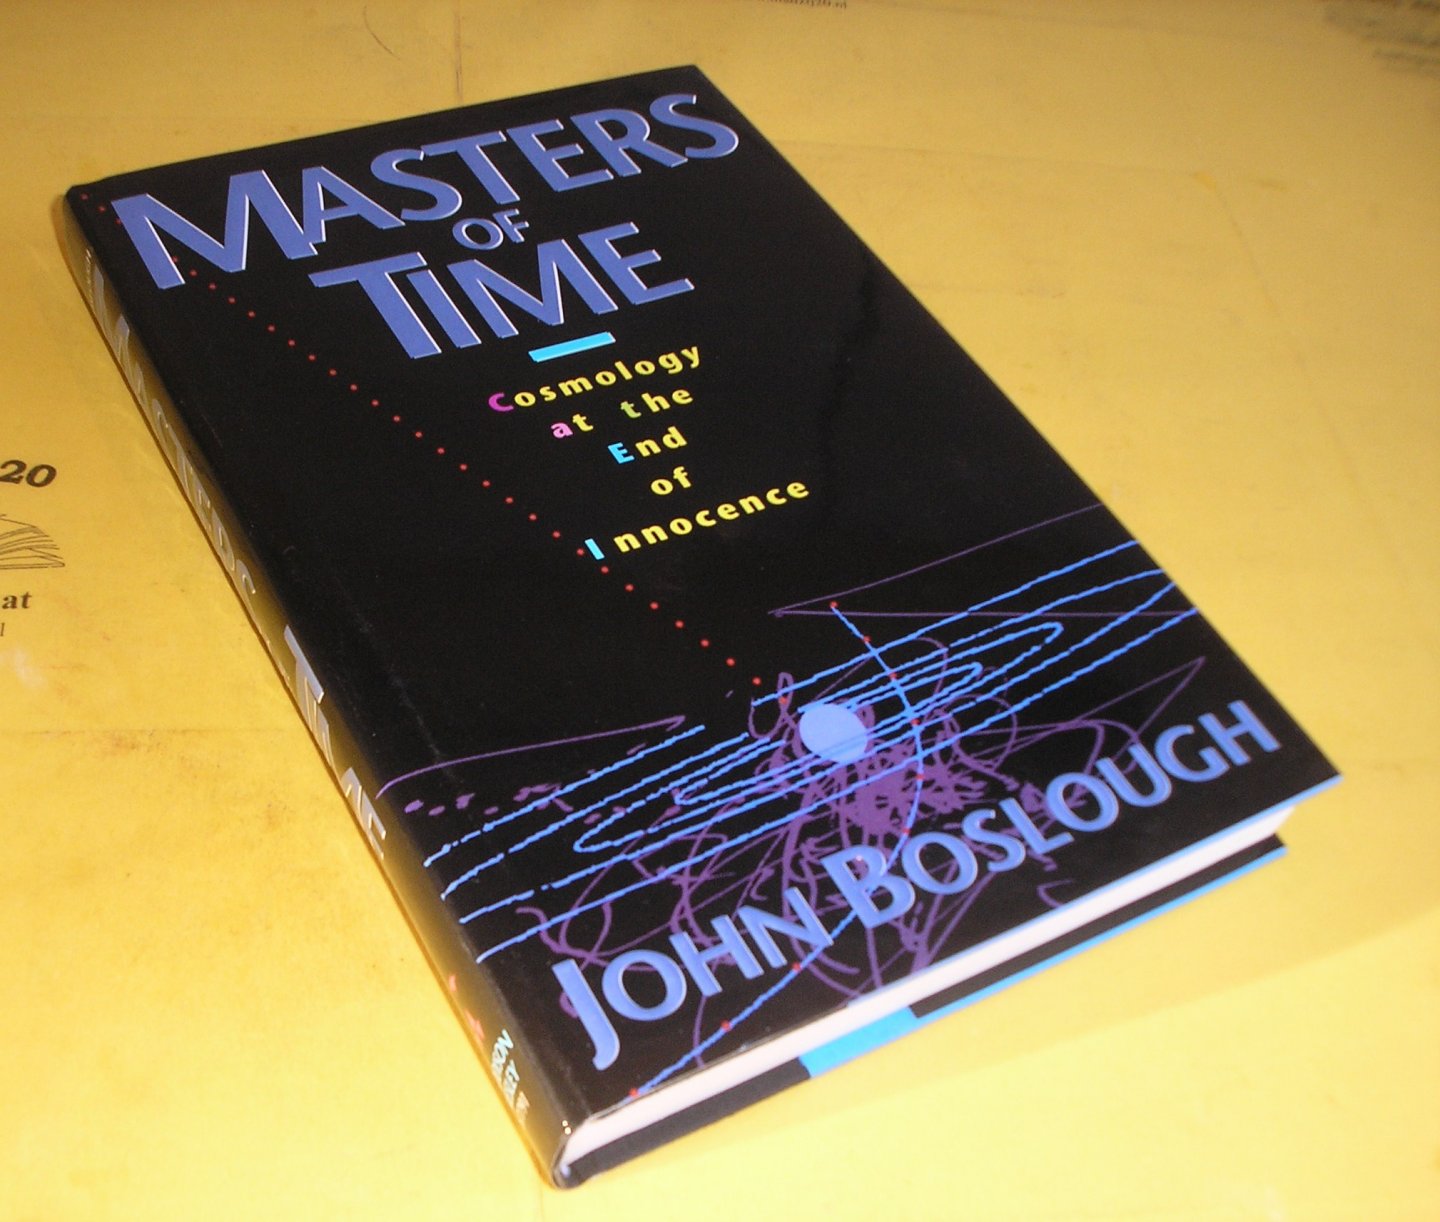 Boslough, John. - Masters of time. Cosmology at the end of innocence.